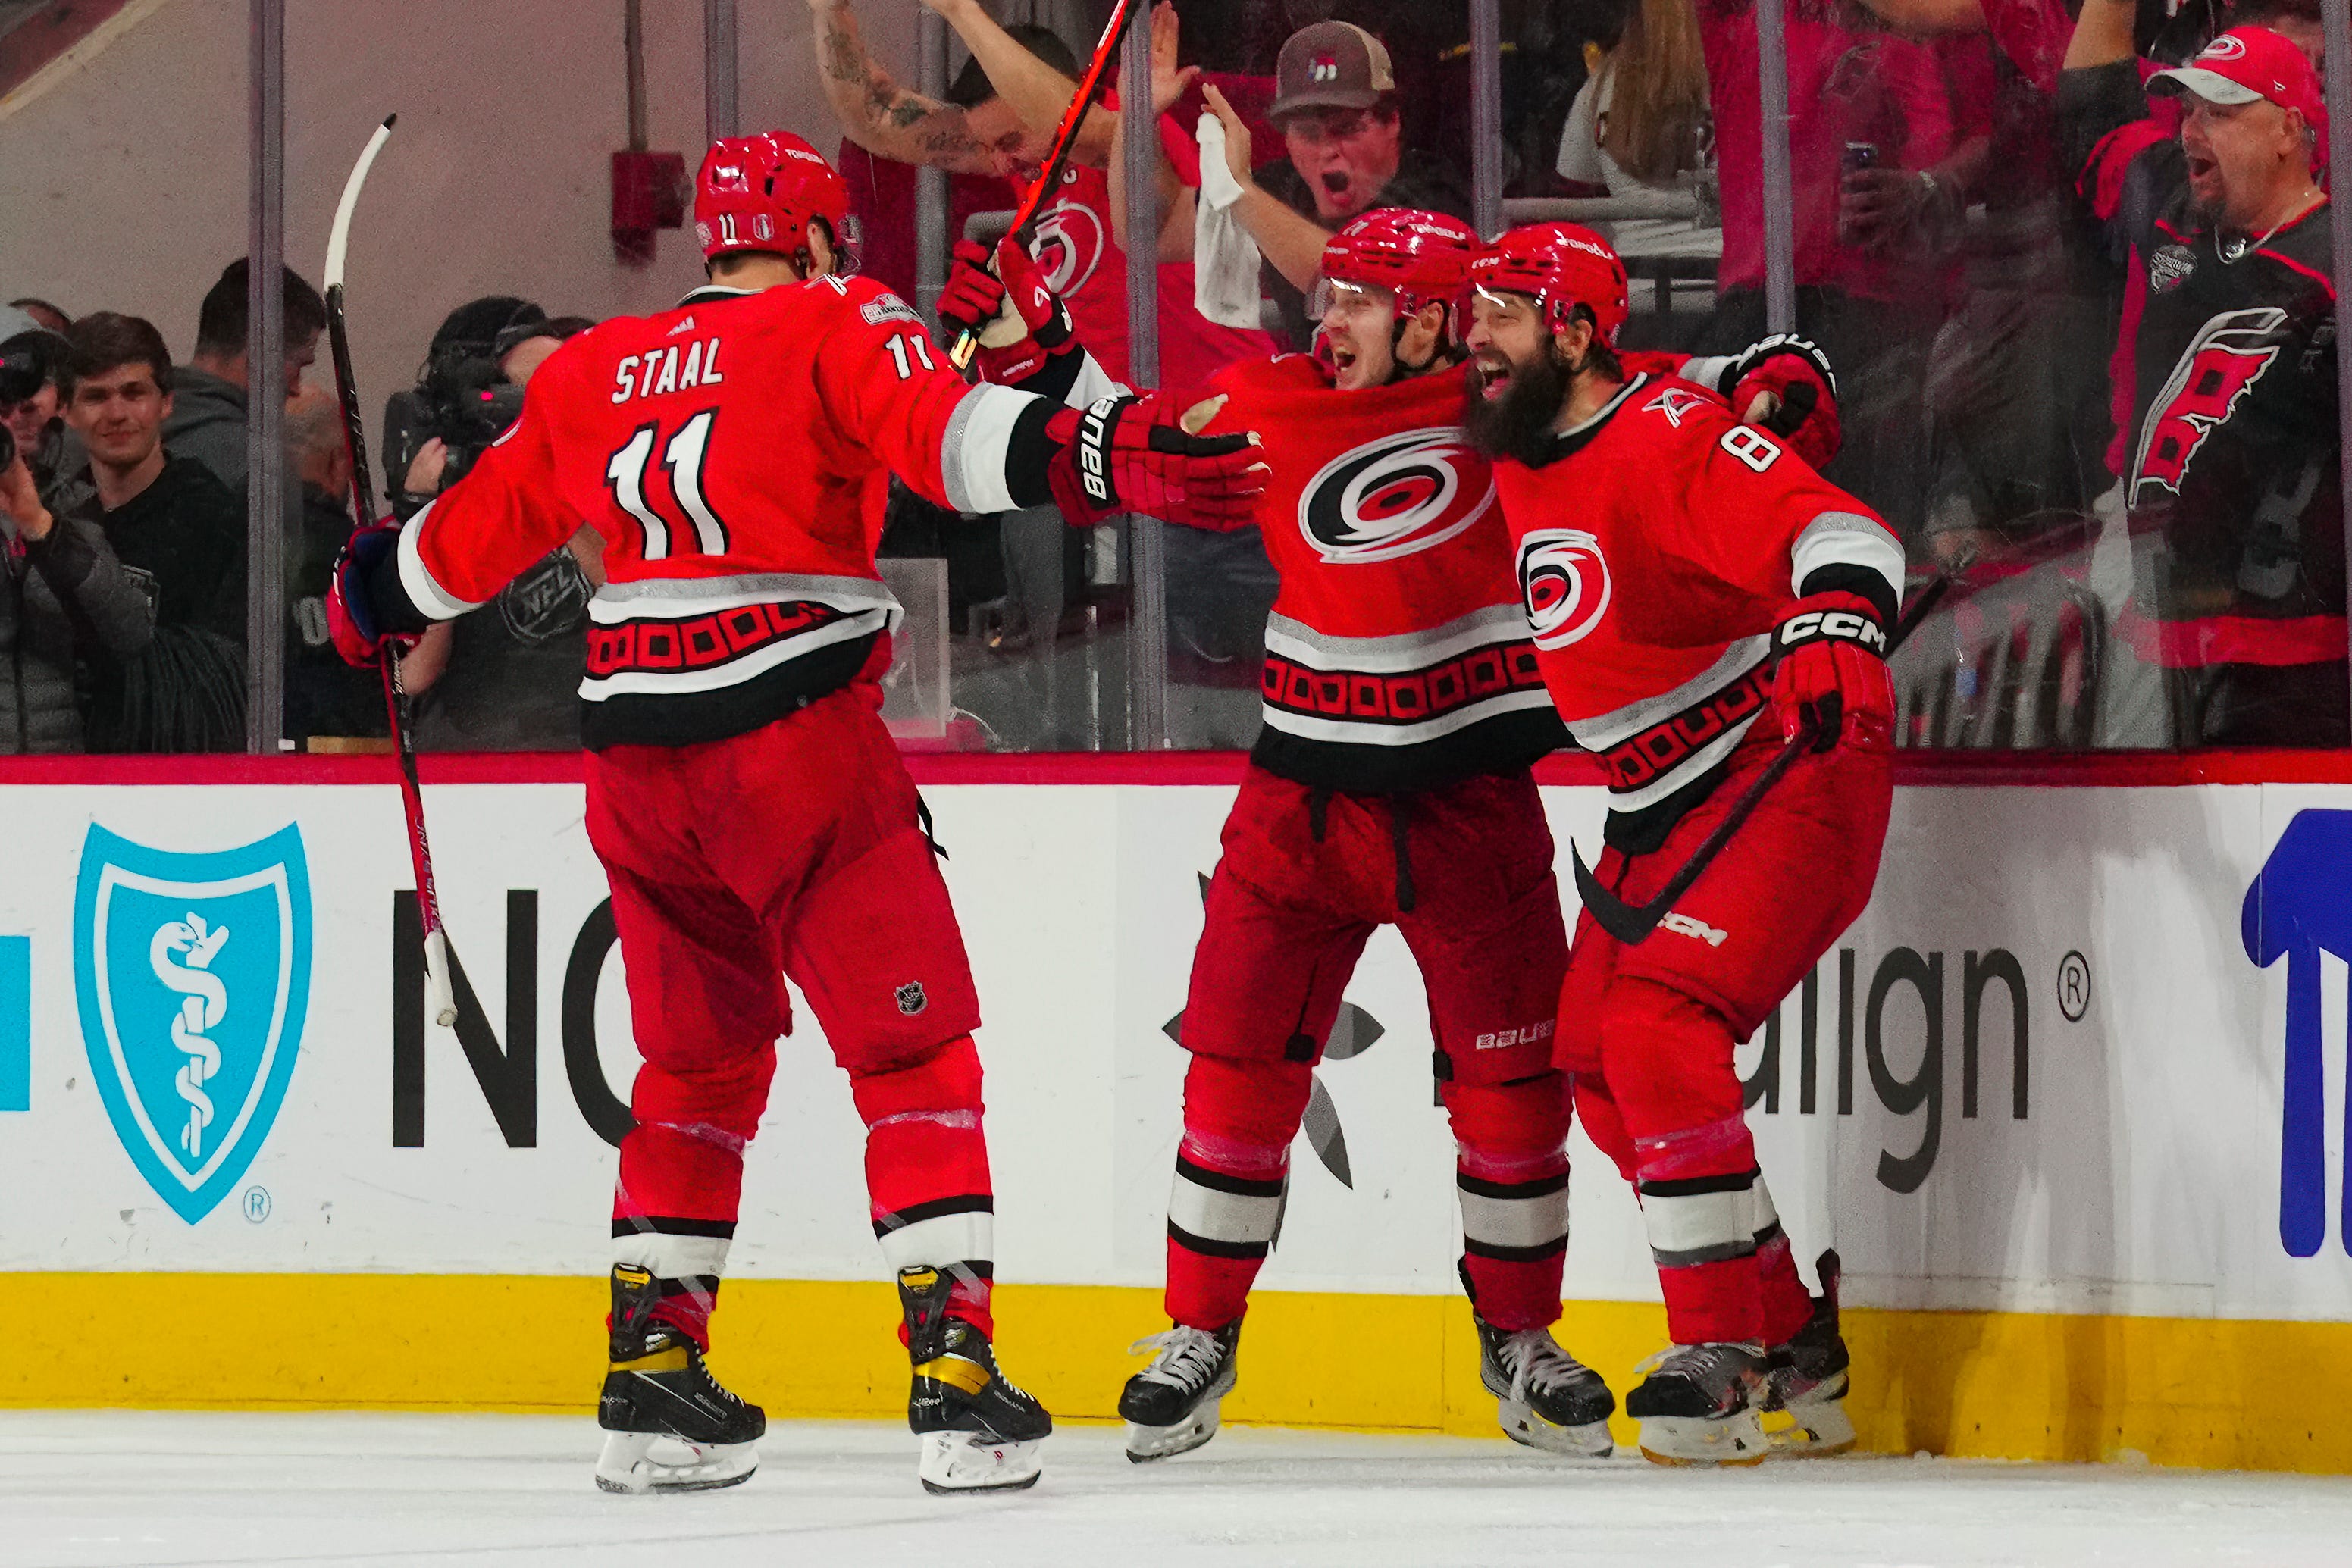 Hurricanes defeat Islanders in overtime after getting away with blatant high stick